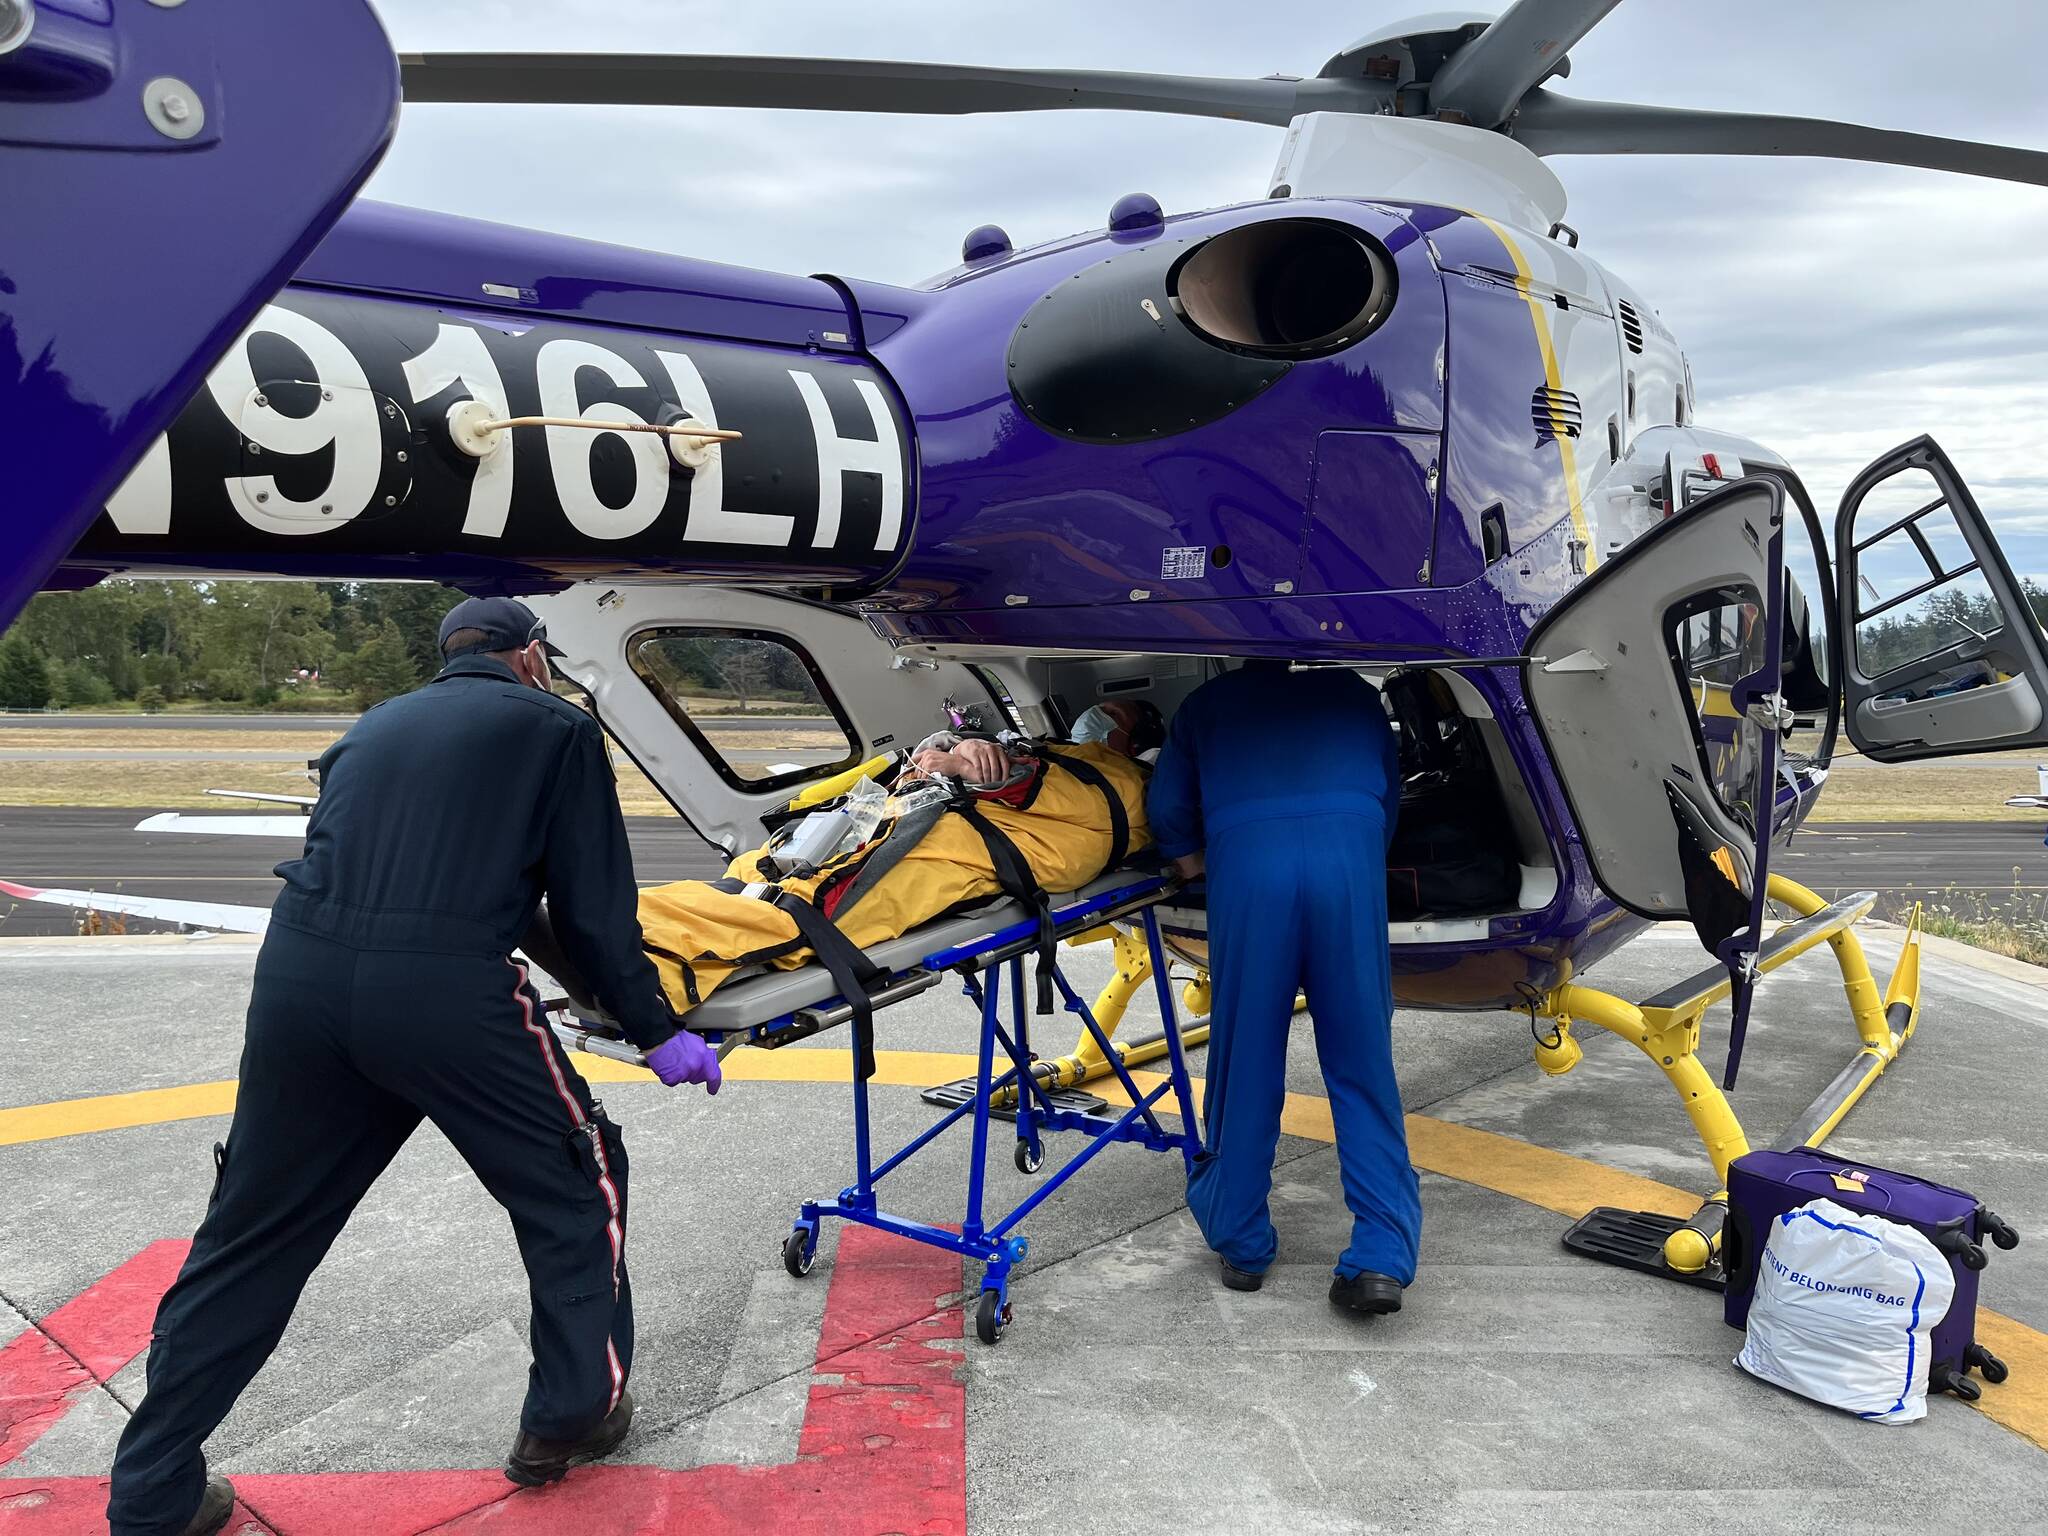 Colleen Smith/staff photo
A patient being flown with Airlift Northwest, which is a program offered by the University of Washington.